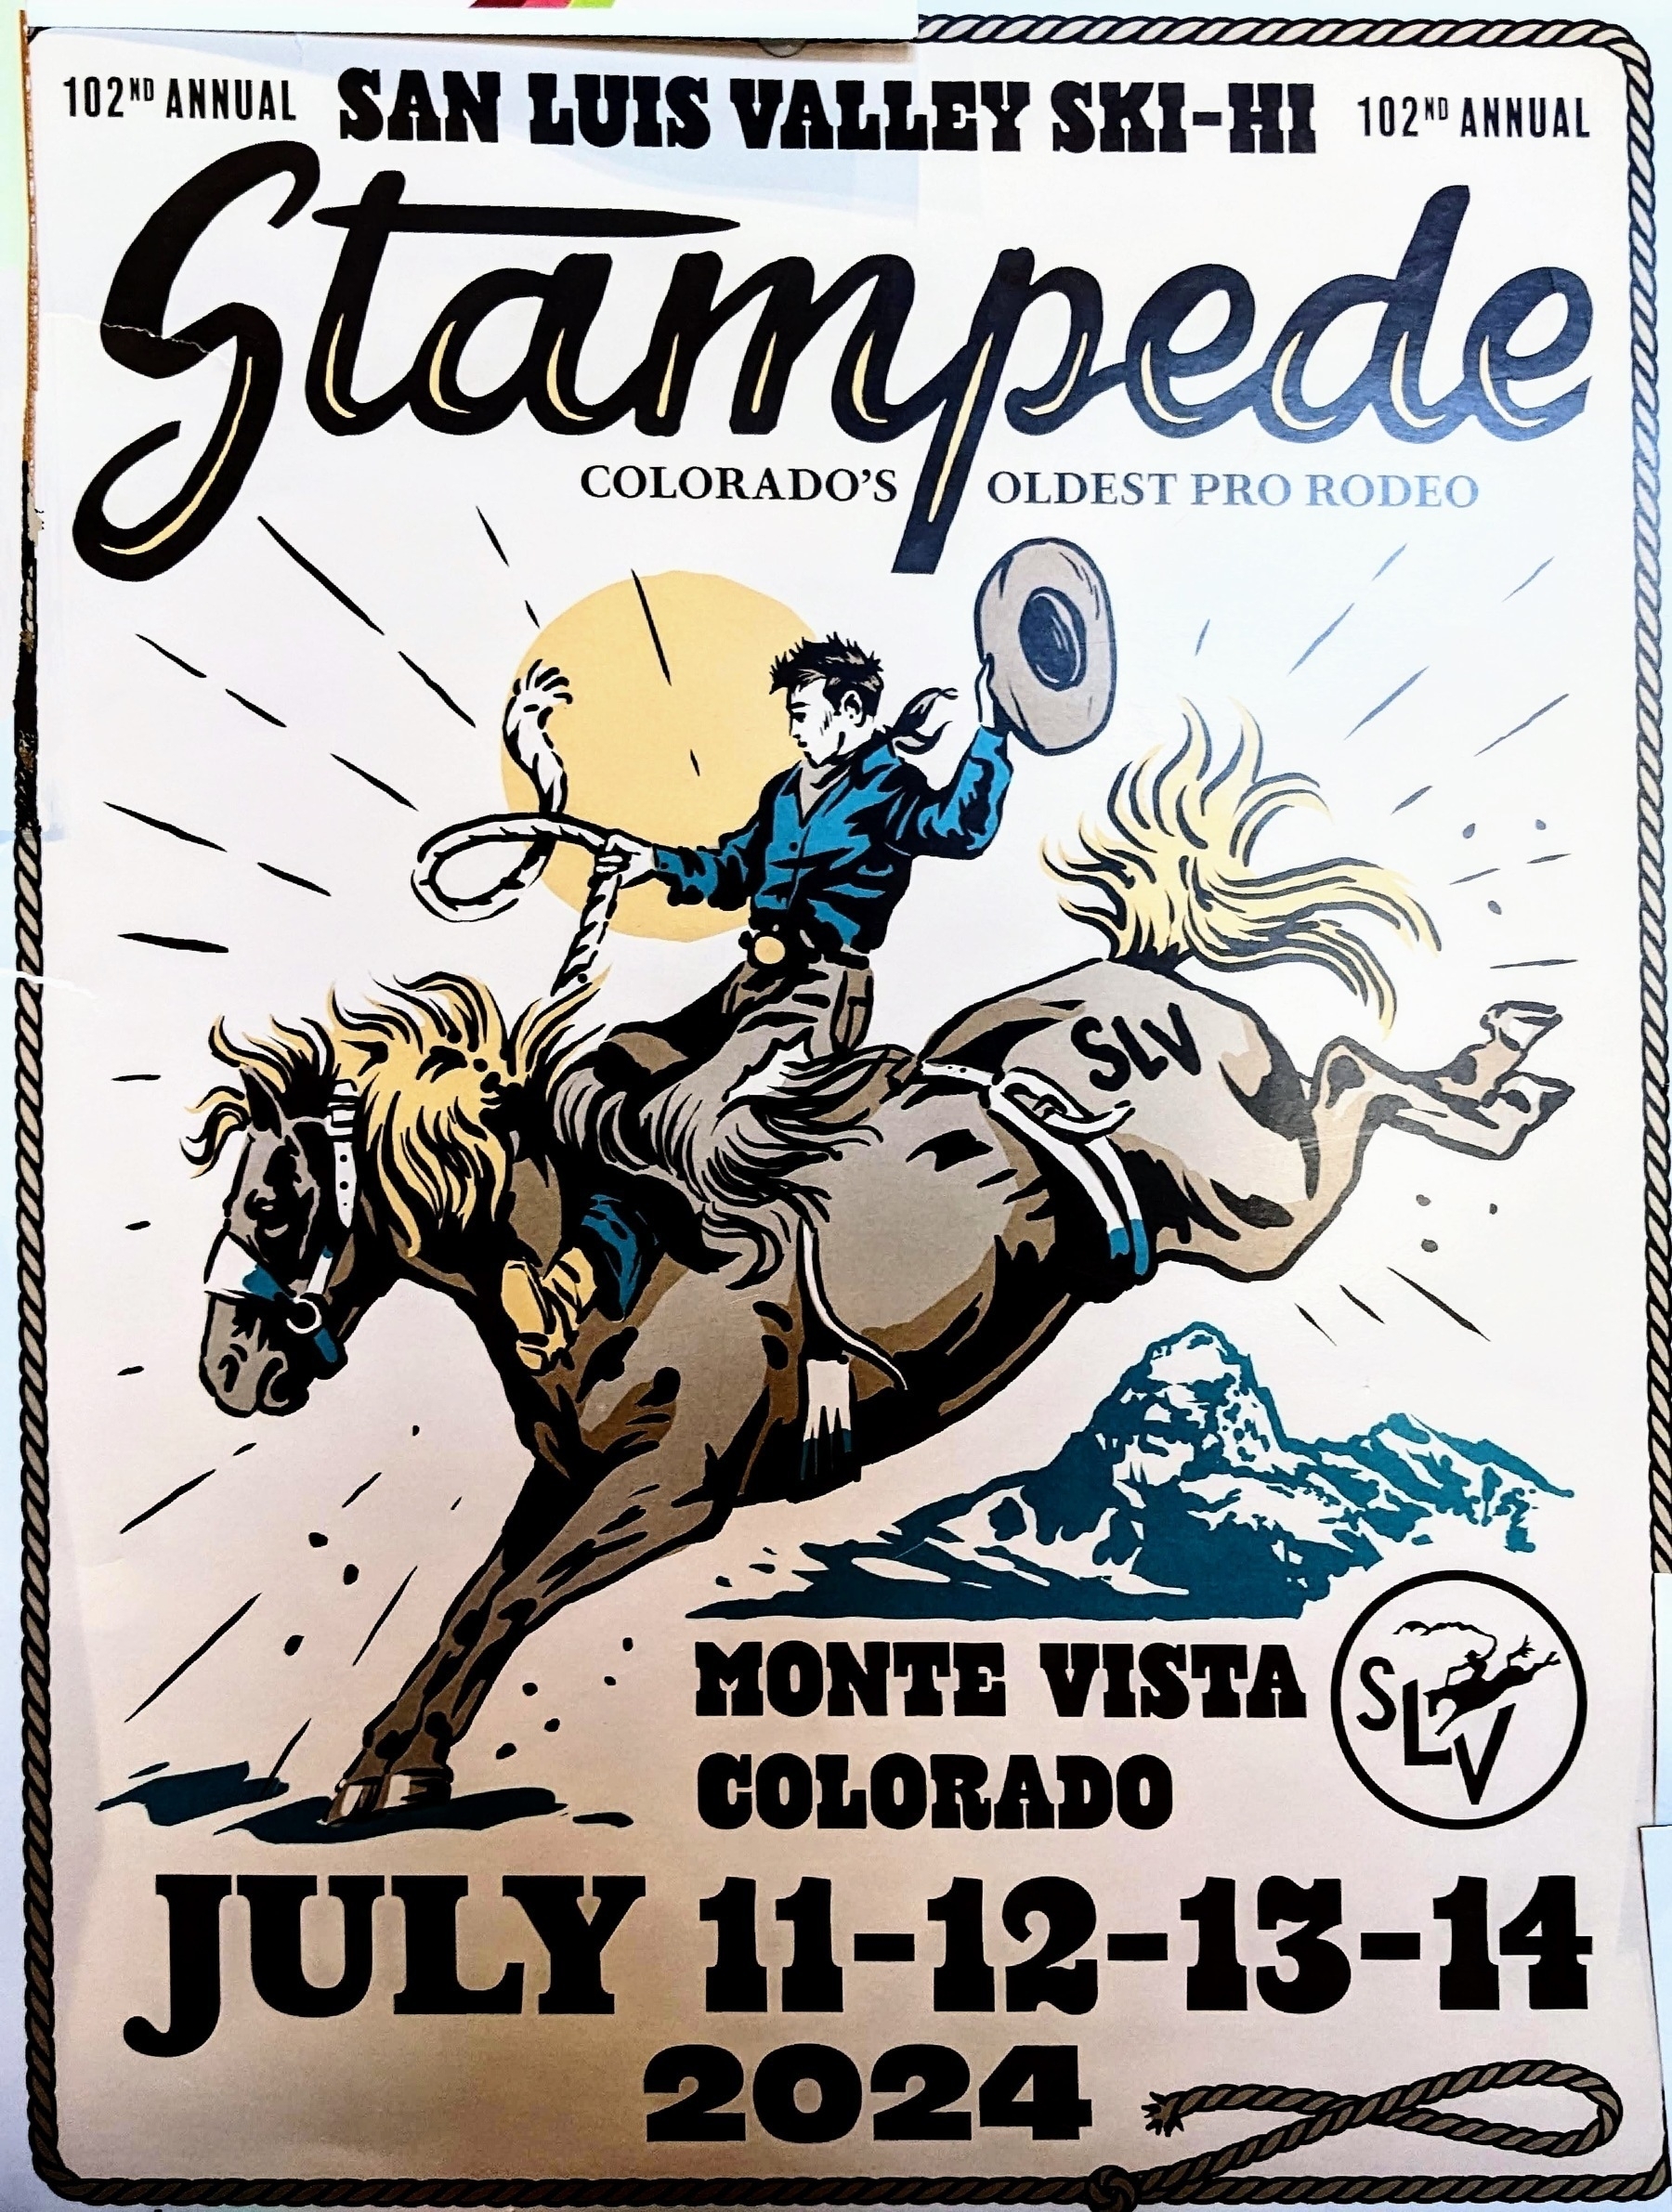 Poster for a Rodeo